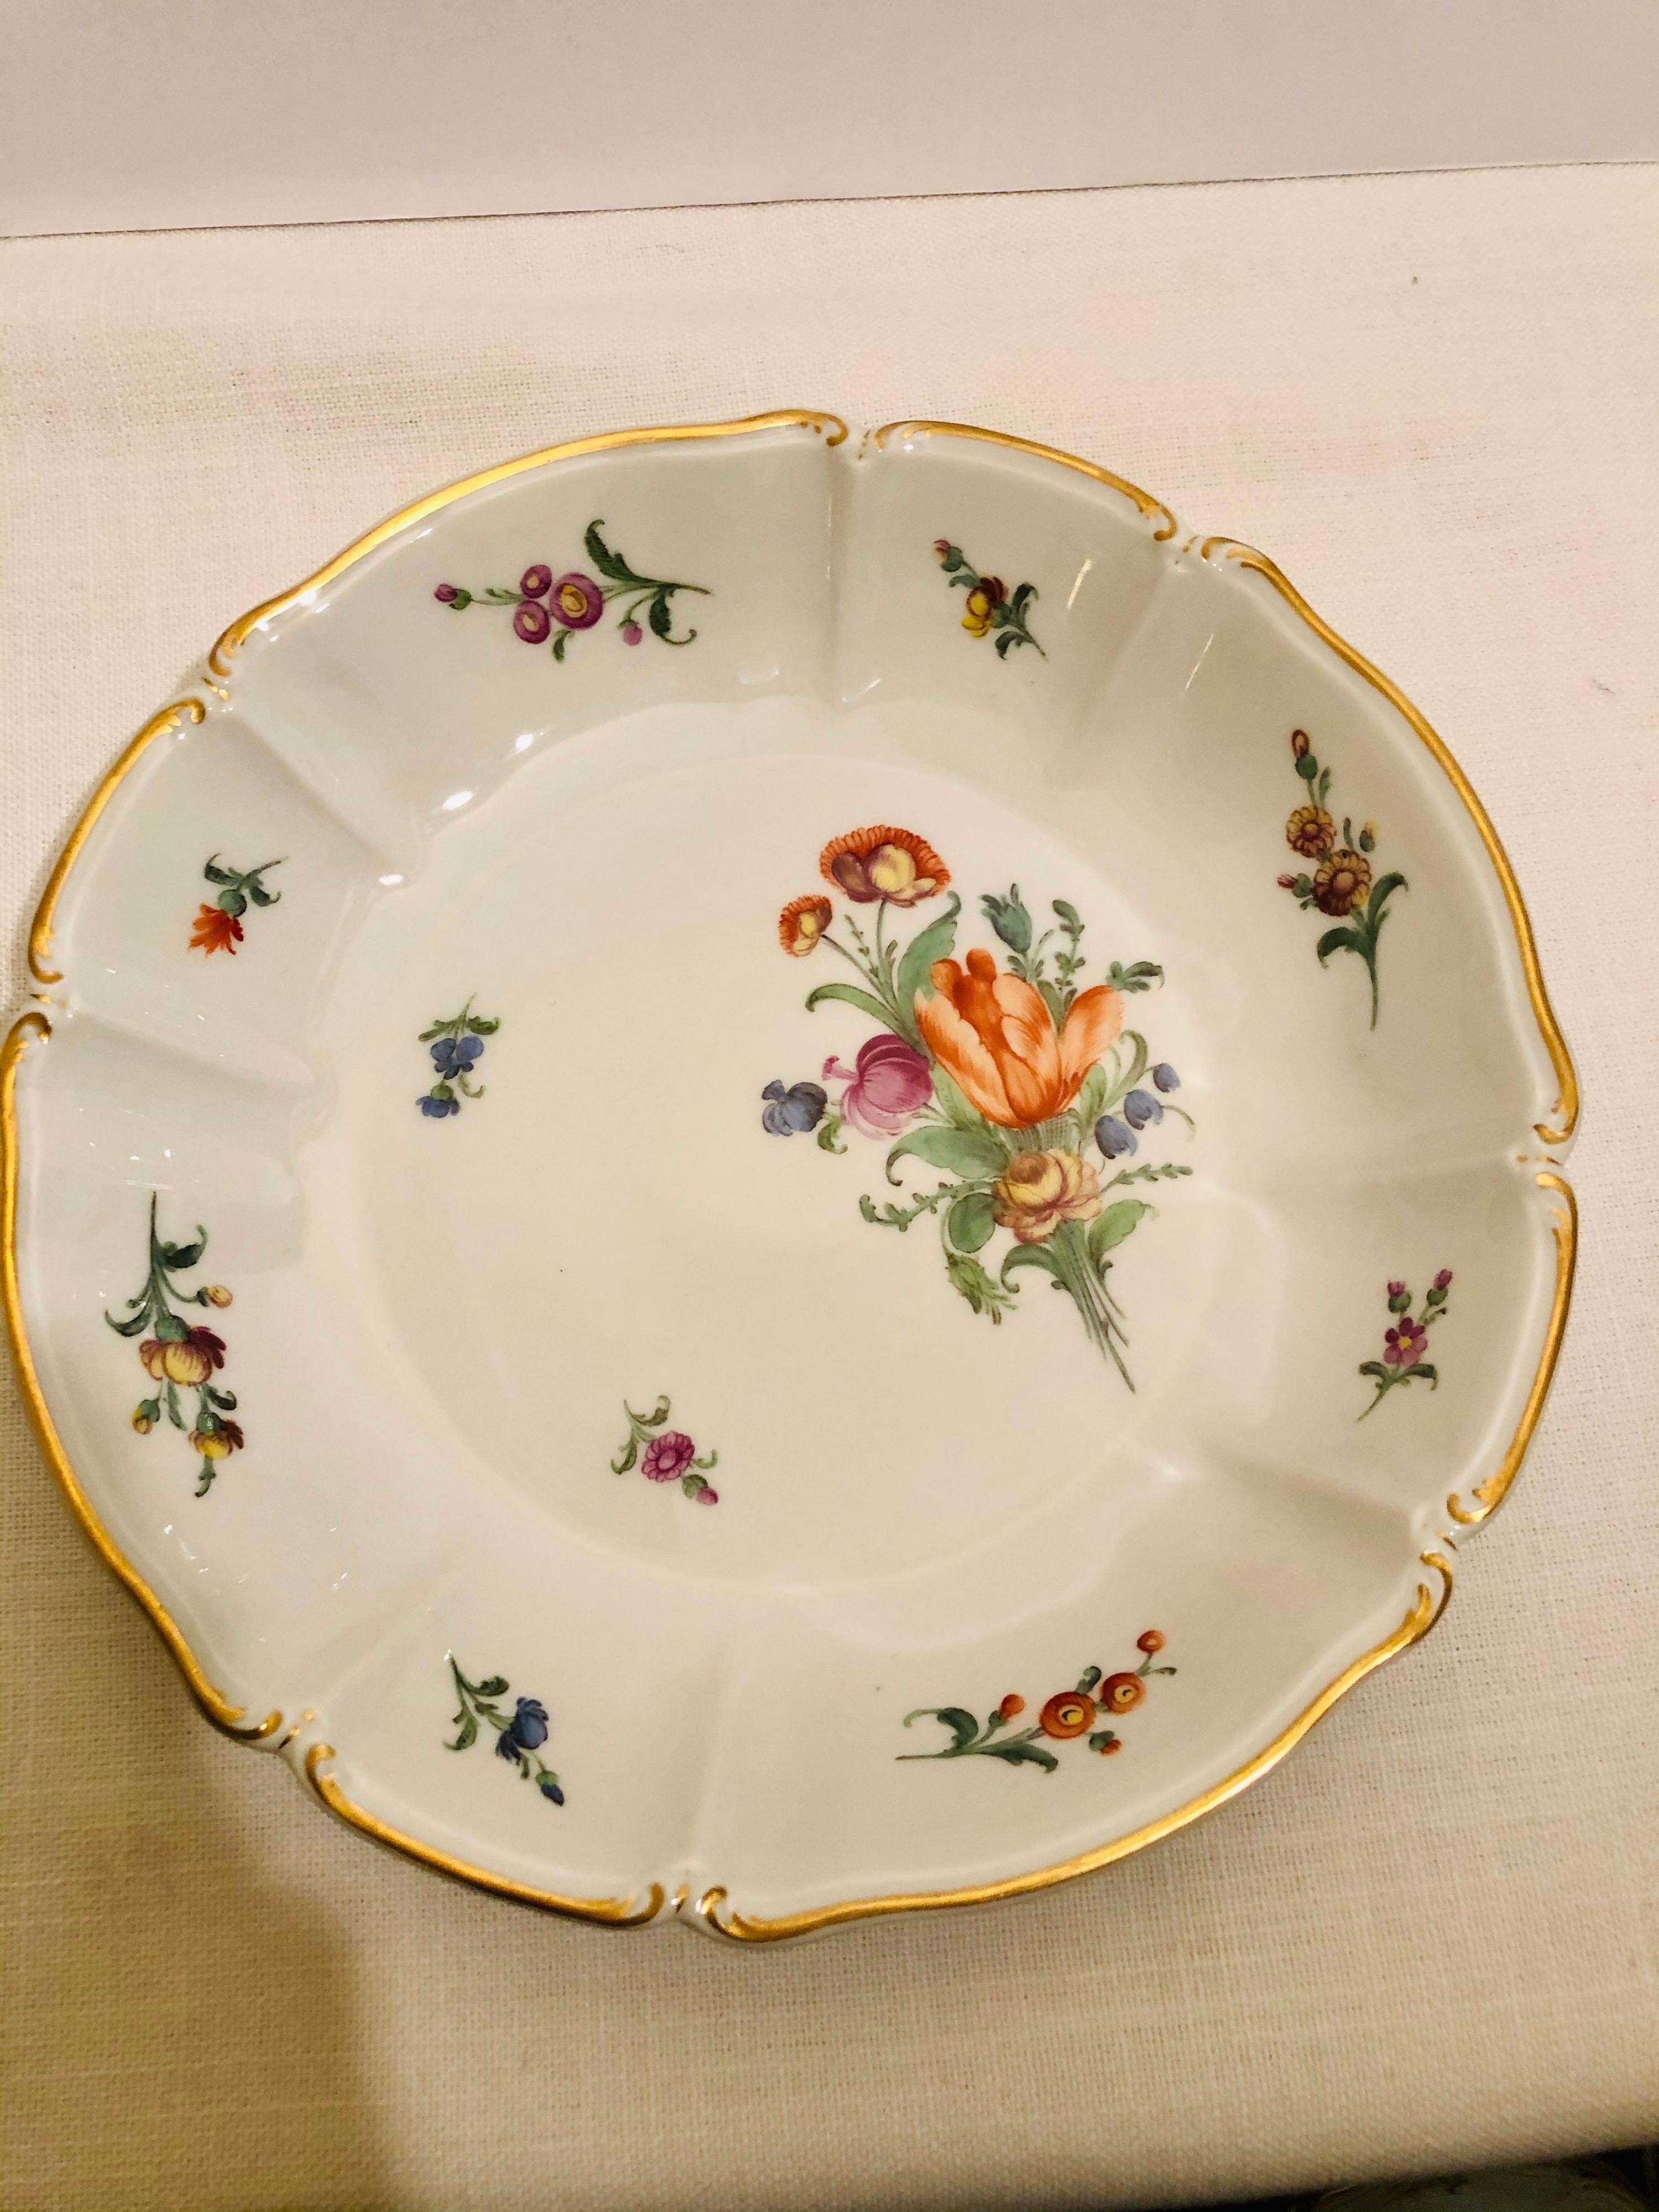 I want to offer you this stunning set of ten Nymphenburg very deep soup bowls. Each of these soup bowls are painted with a different colorful and exquisite flower bouquet. These bowls are much deeper than most wide rim soup bowls. They would be